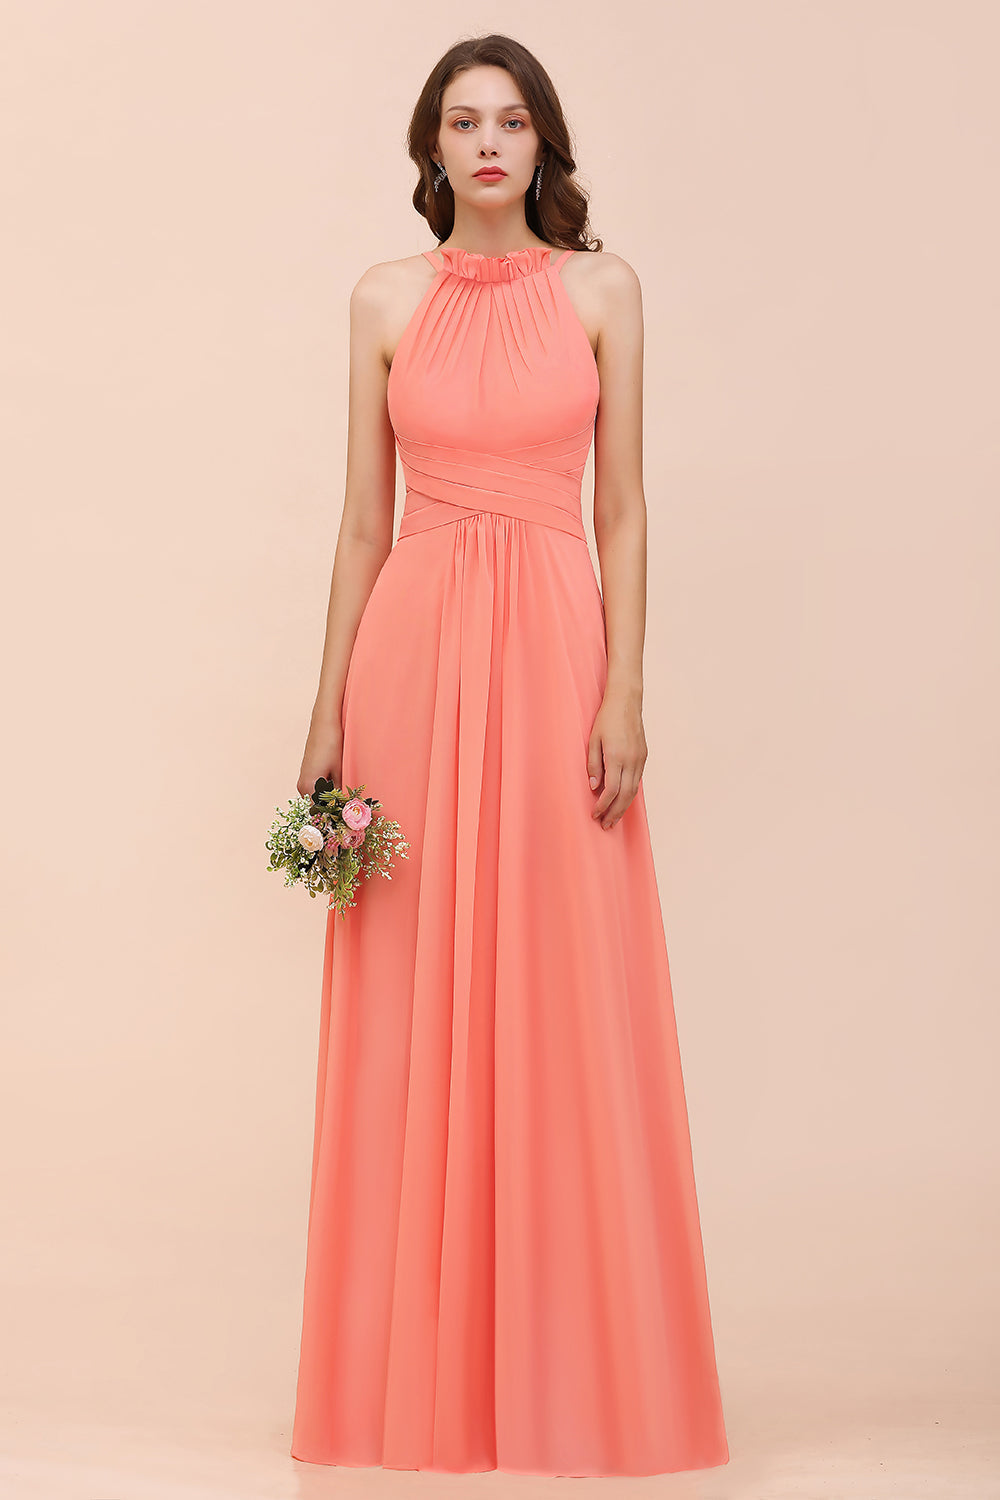 Load image into Gallery viewer, Charming Long Chiffon A-Line Halter Coral Bridesmaid Dresses-BIZTUNNEL
